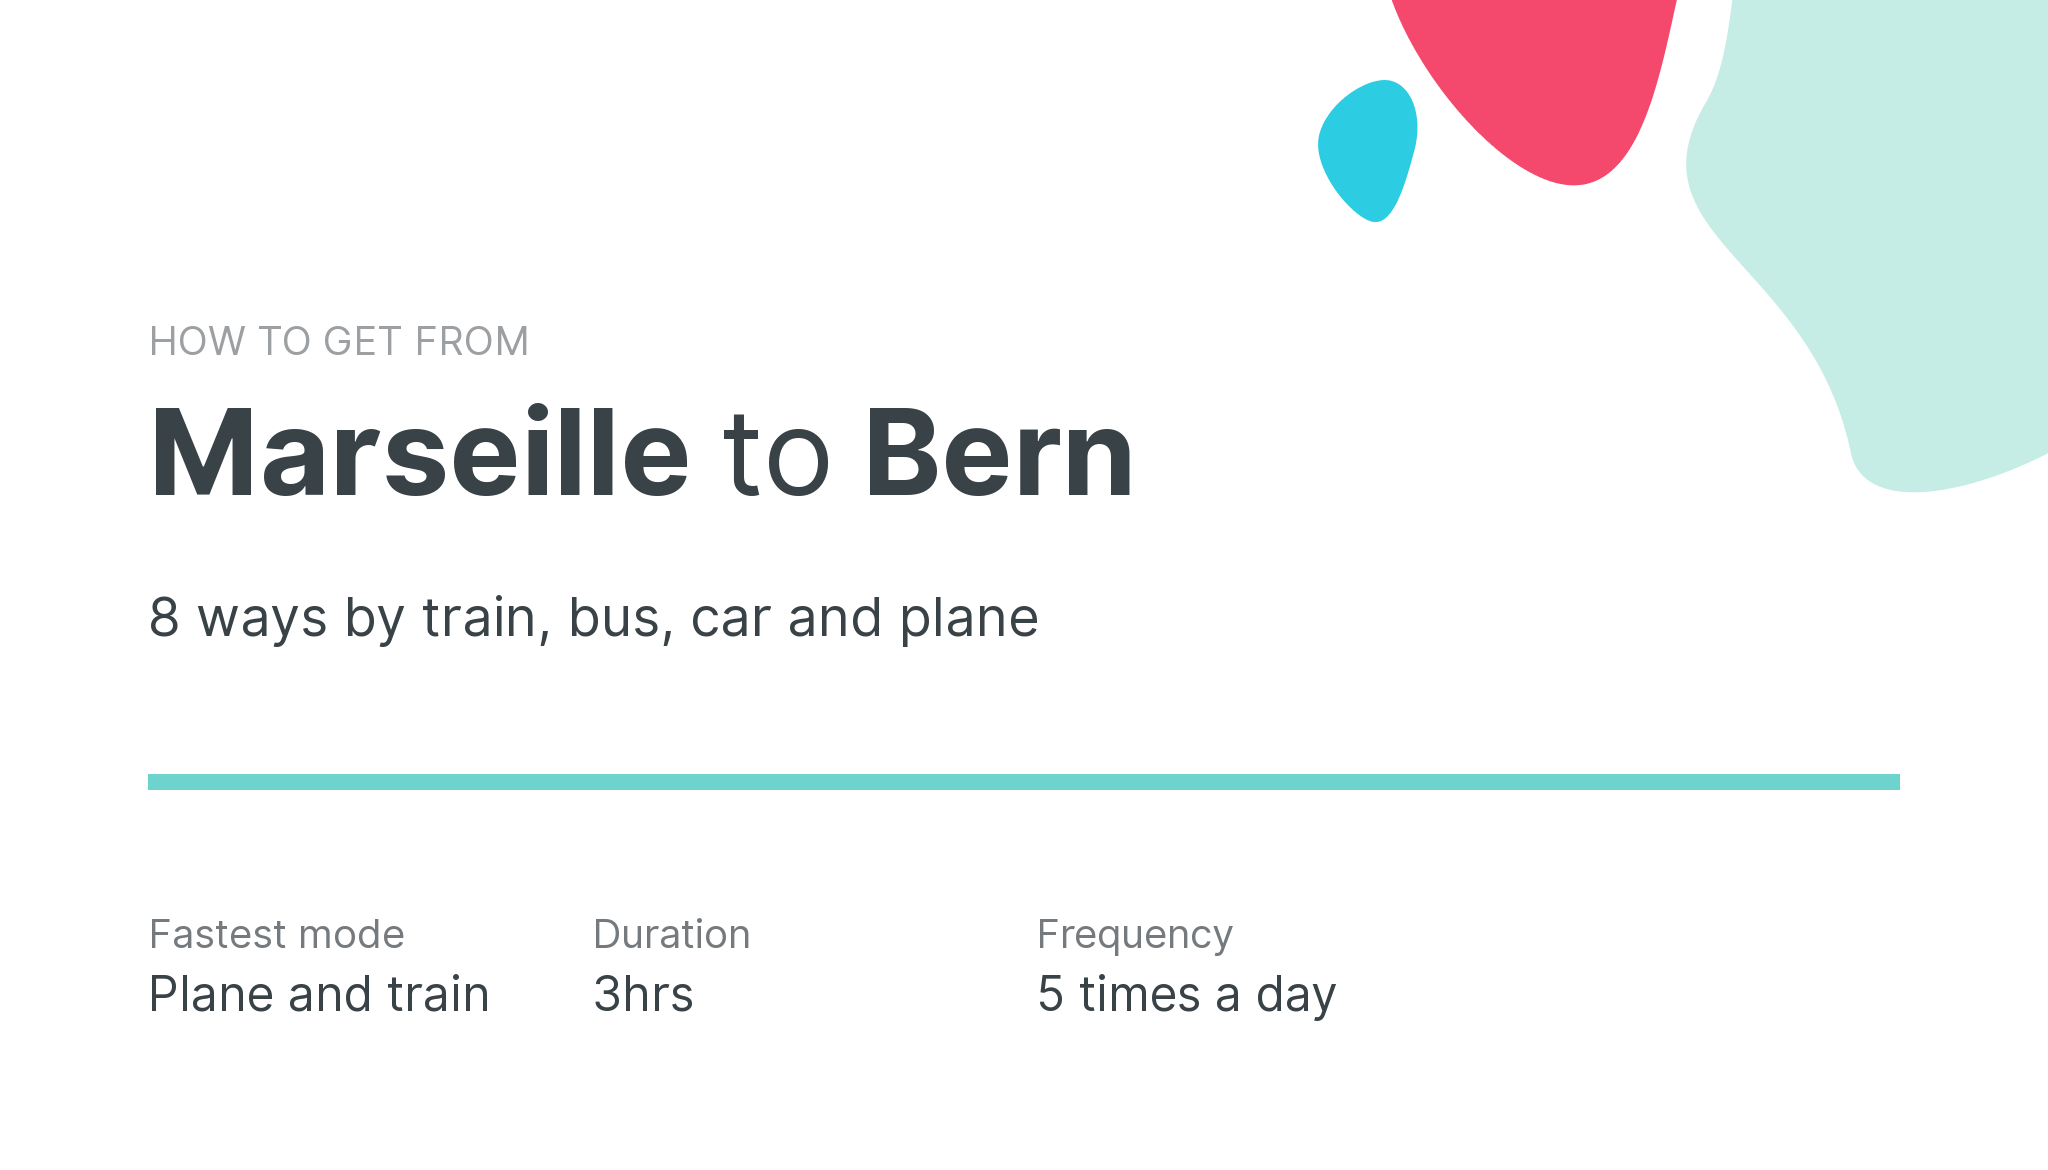 How do I get from Marseille to Bern